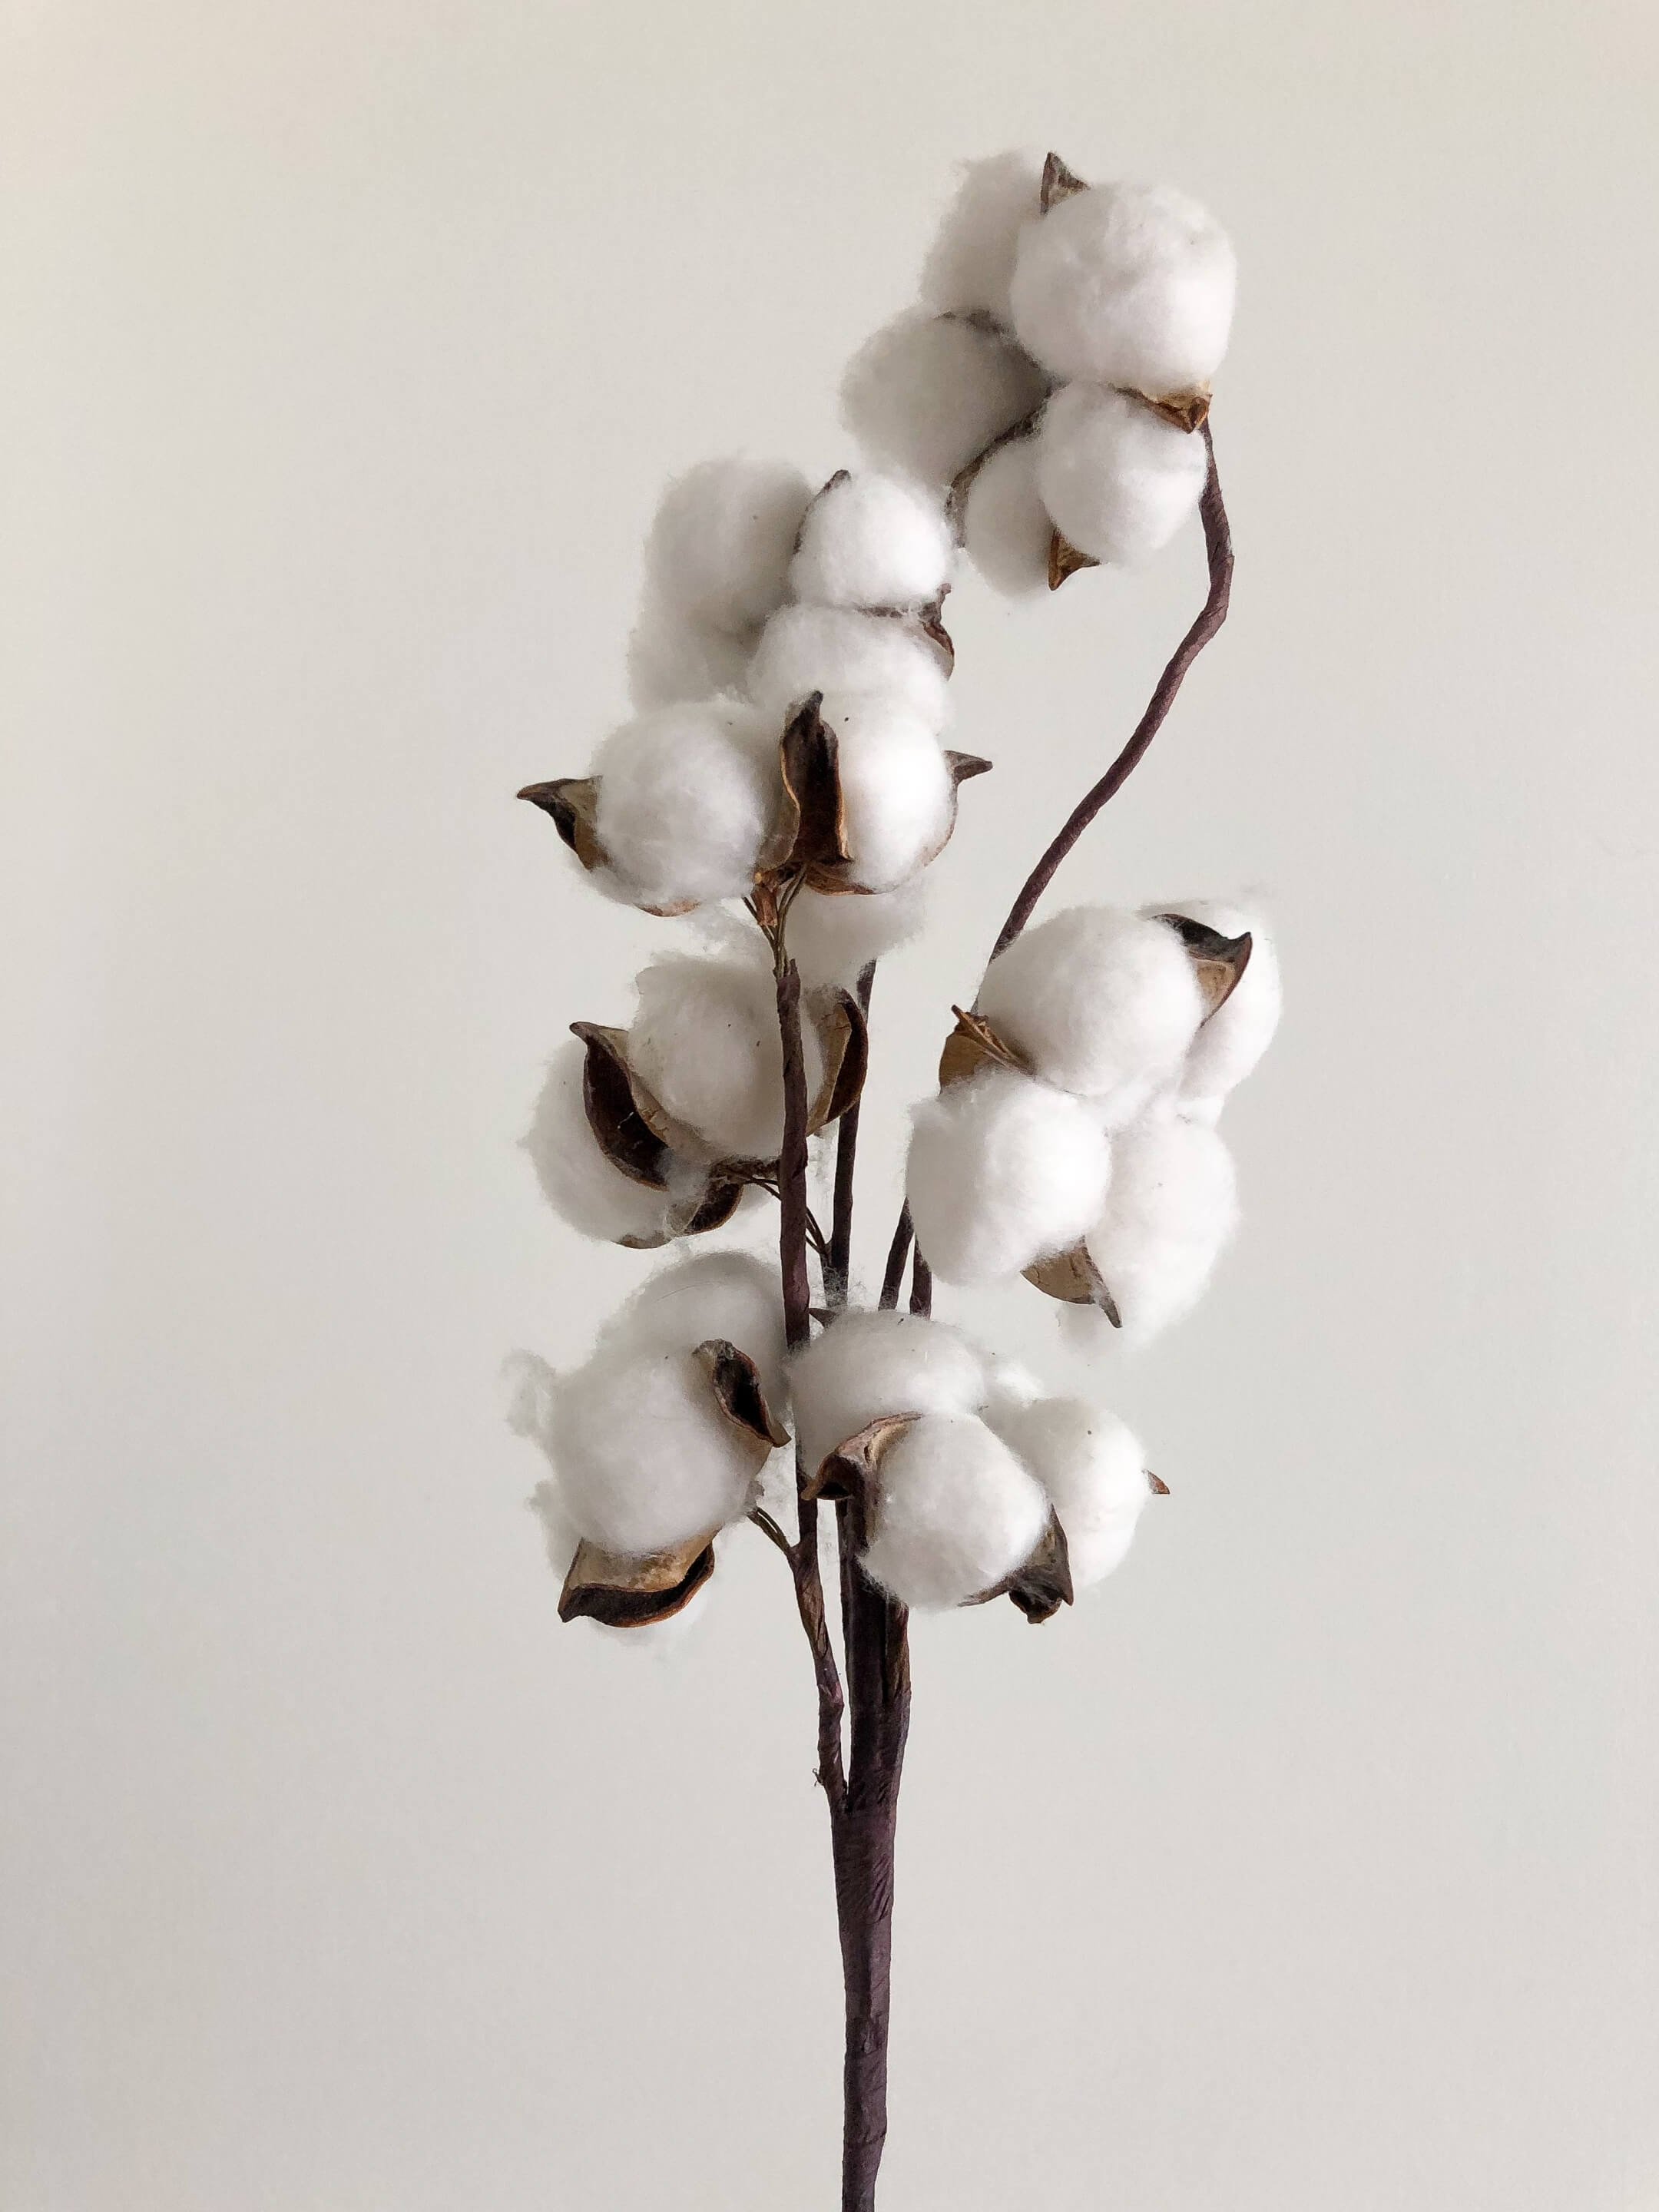 A cotton plant on a beige background